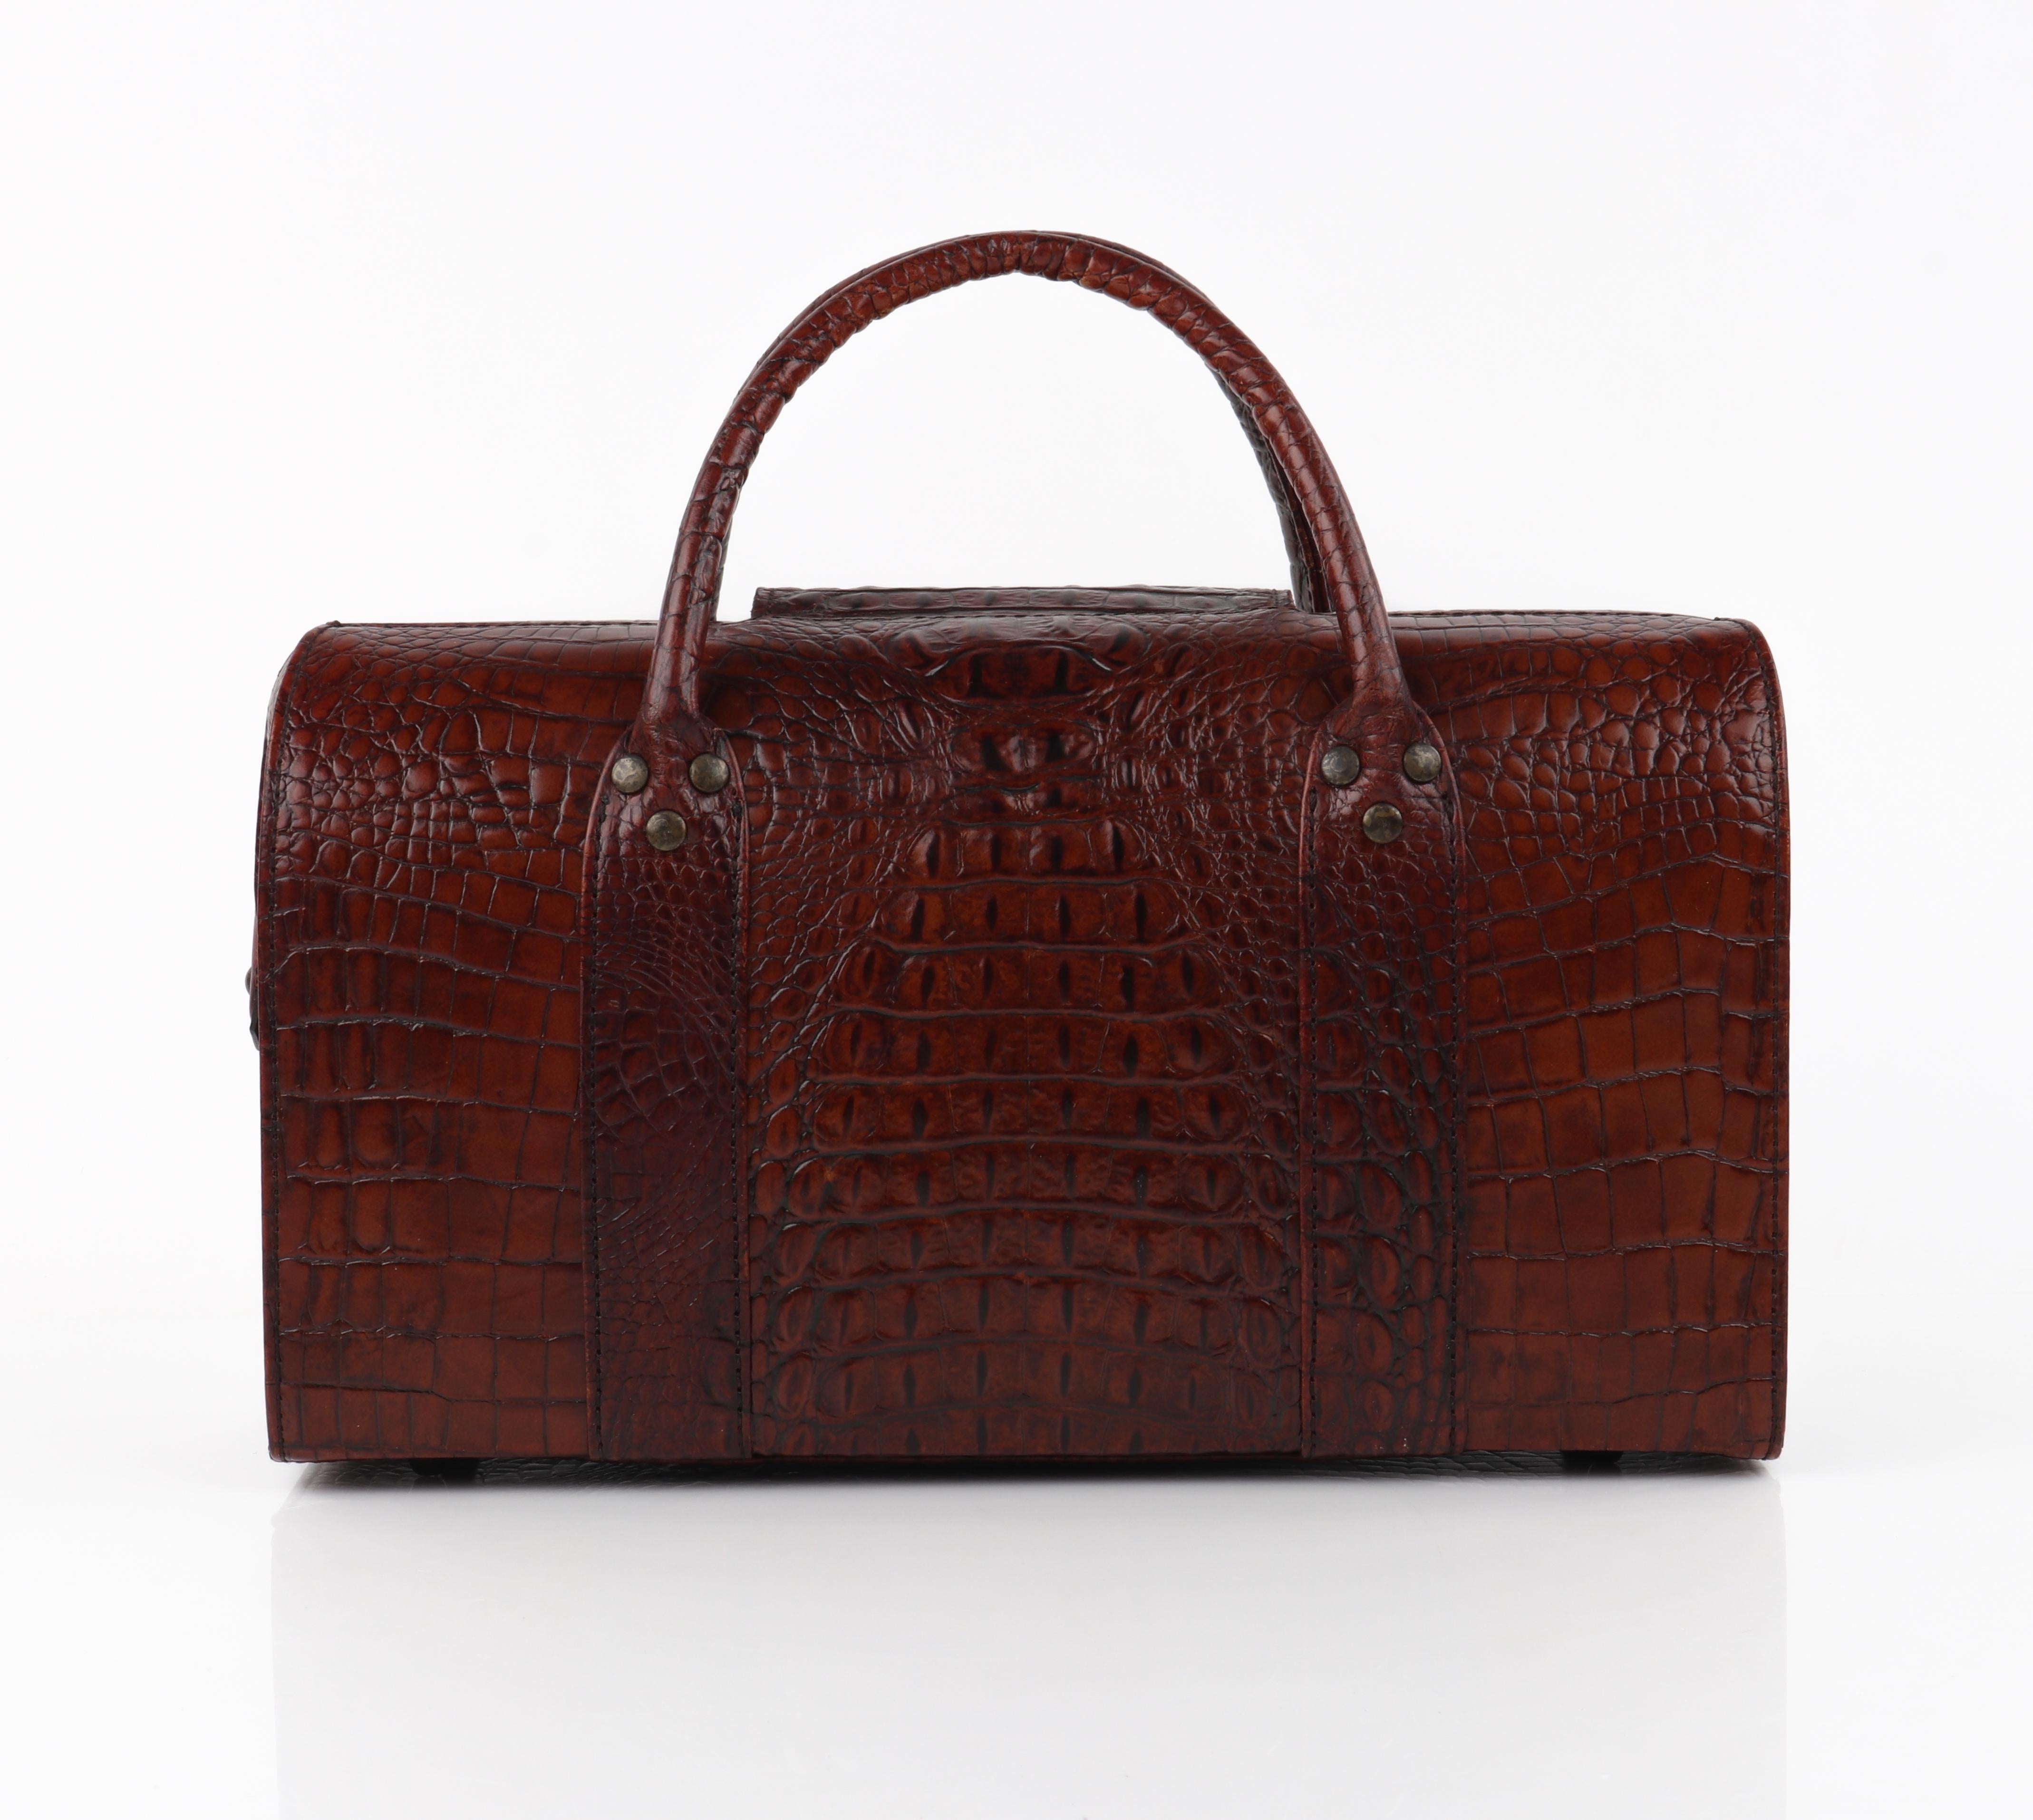 ALEXANDER McQUEEN c.2003 Brown Leather Crocodile Embossed Buckle Box Handbag In Good Condition For Sale In Thiensville, WI